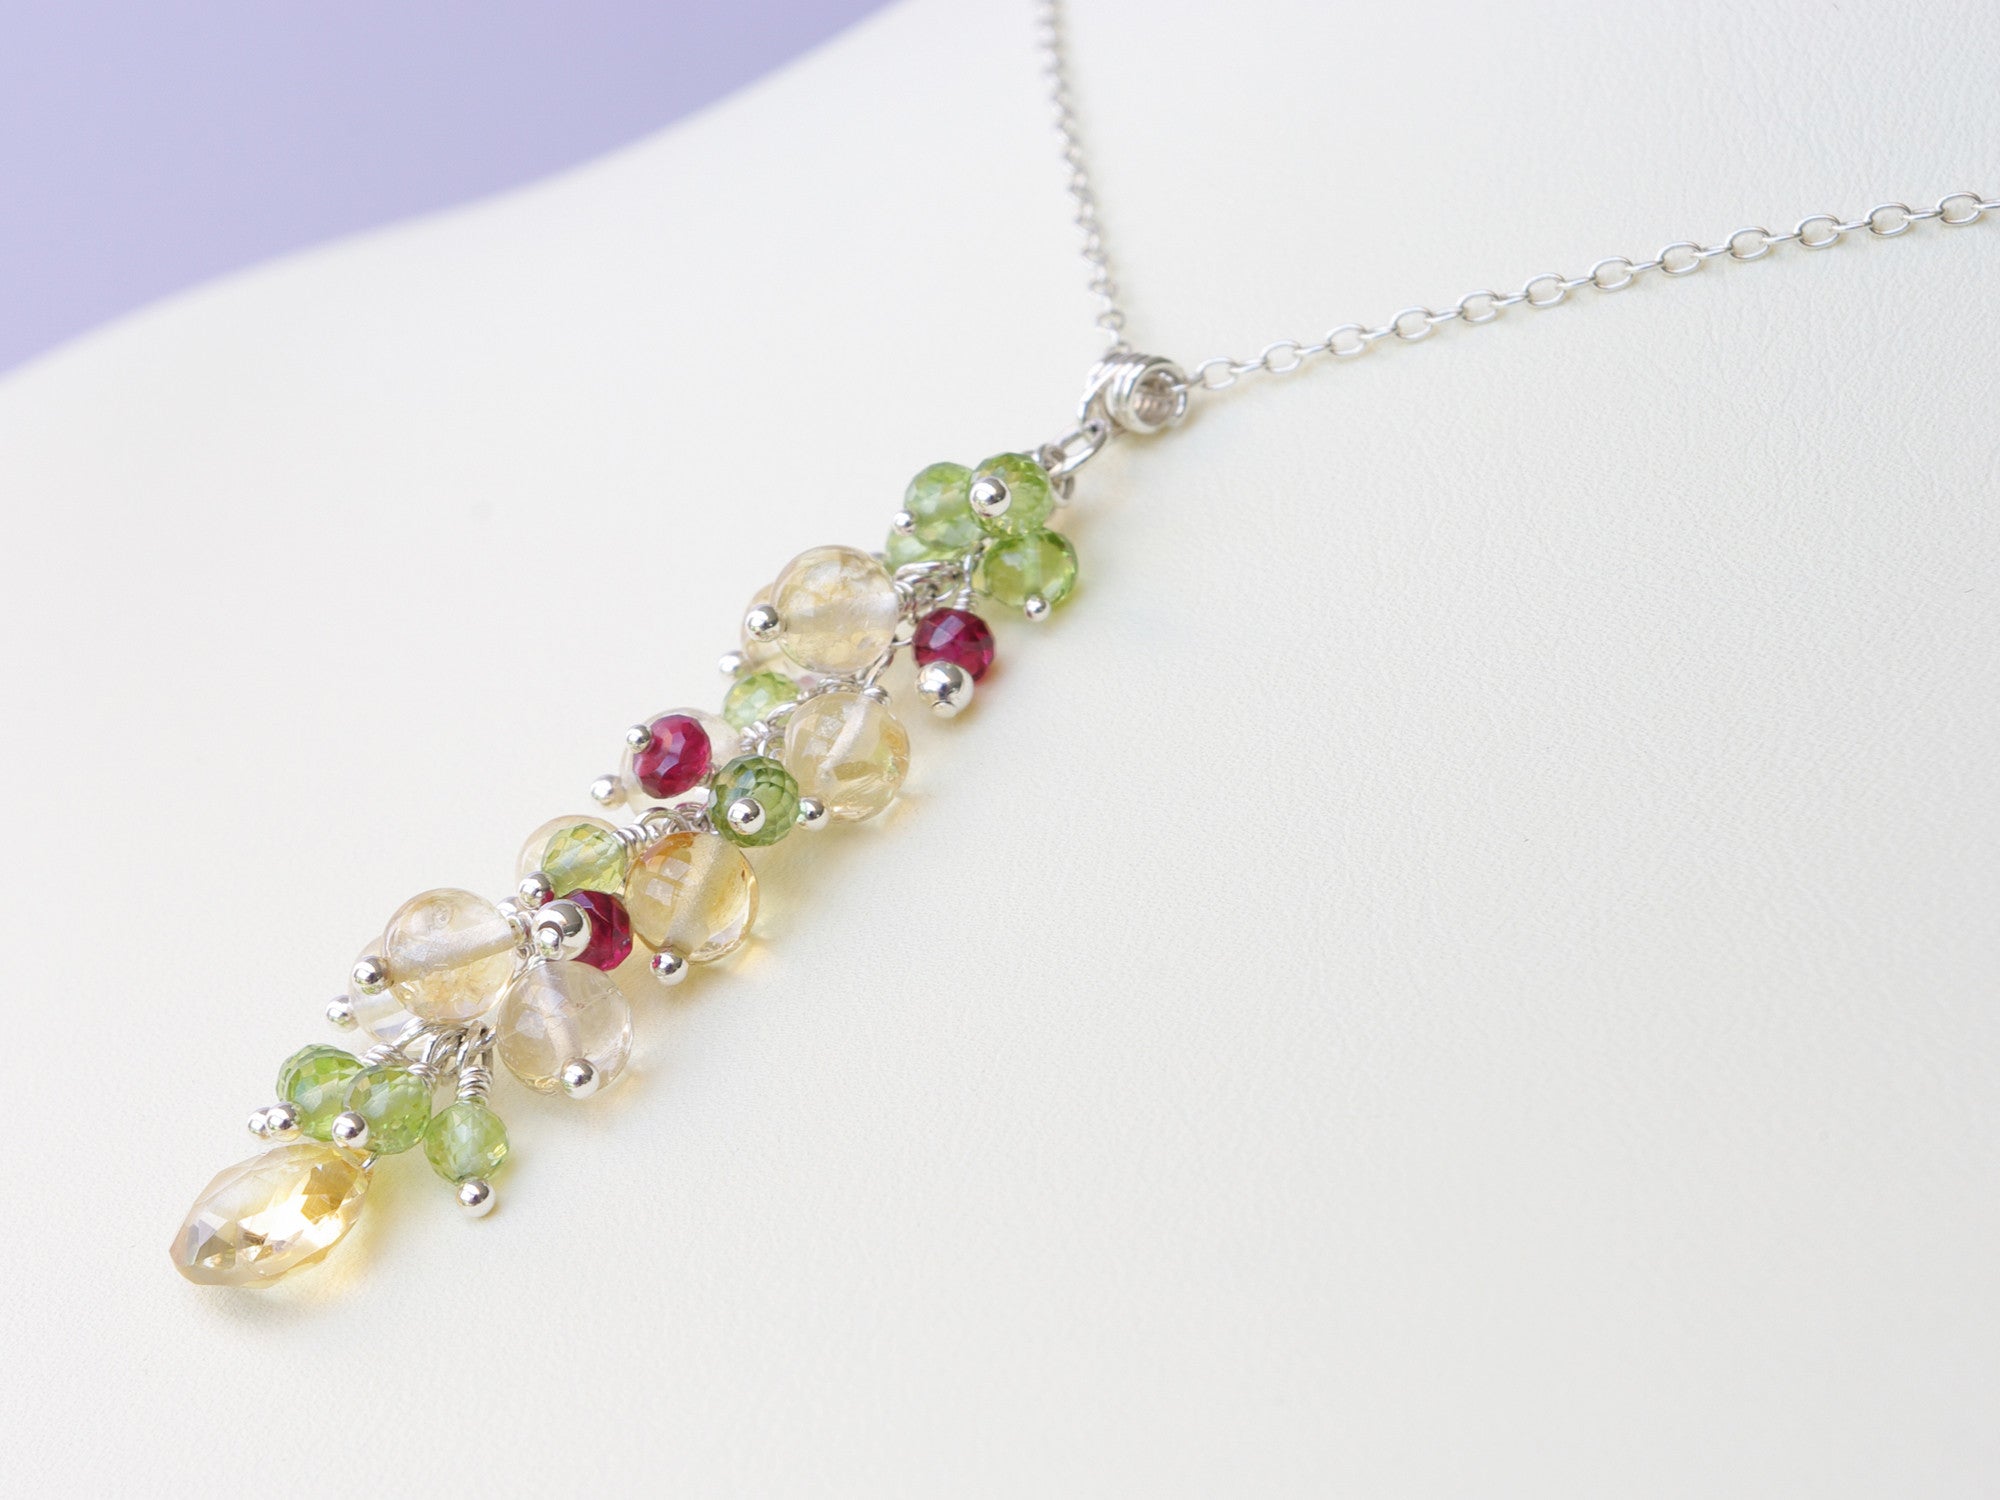 Liana Necklace - Exclusive & Handmade with Peridot, Citrine & Red Spinel